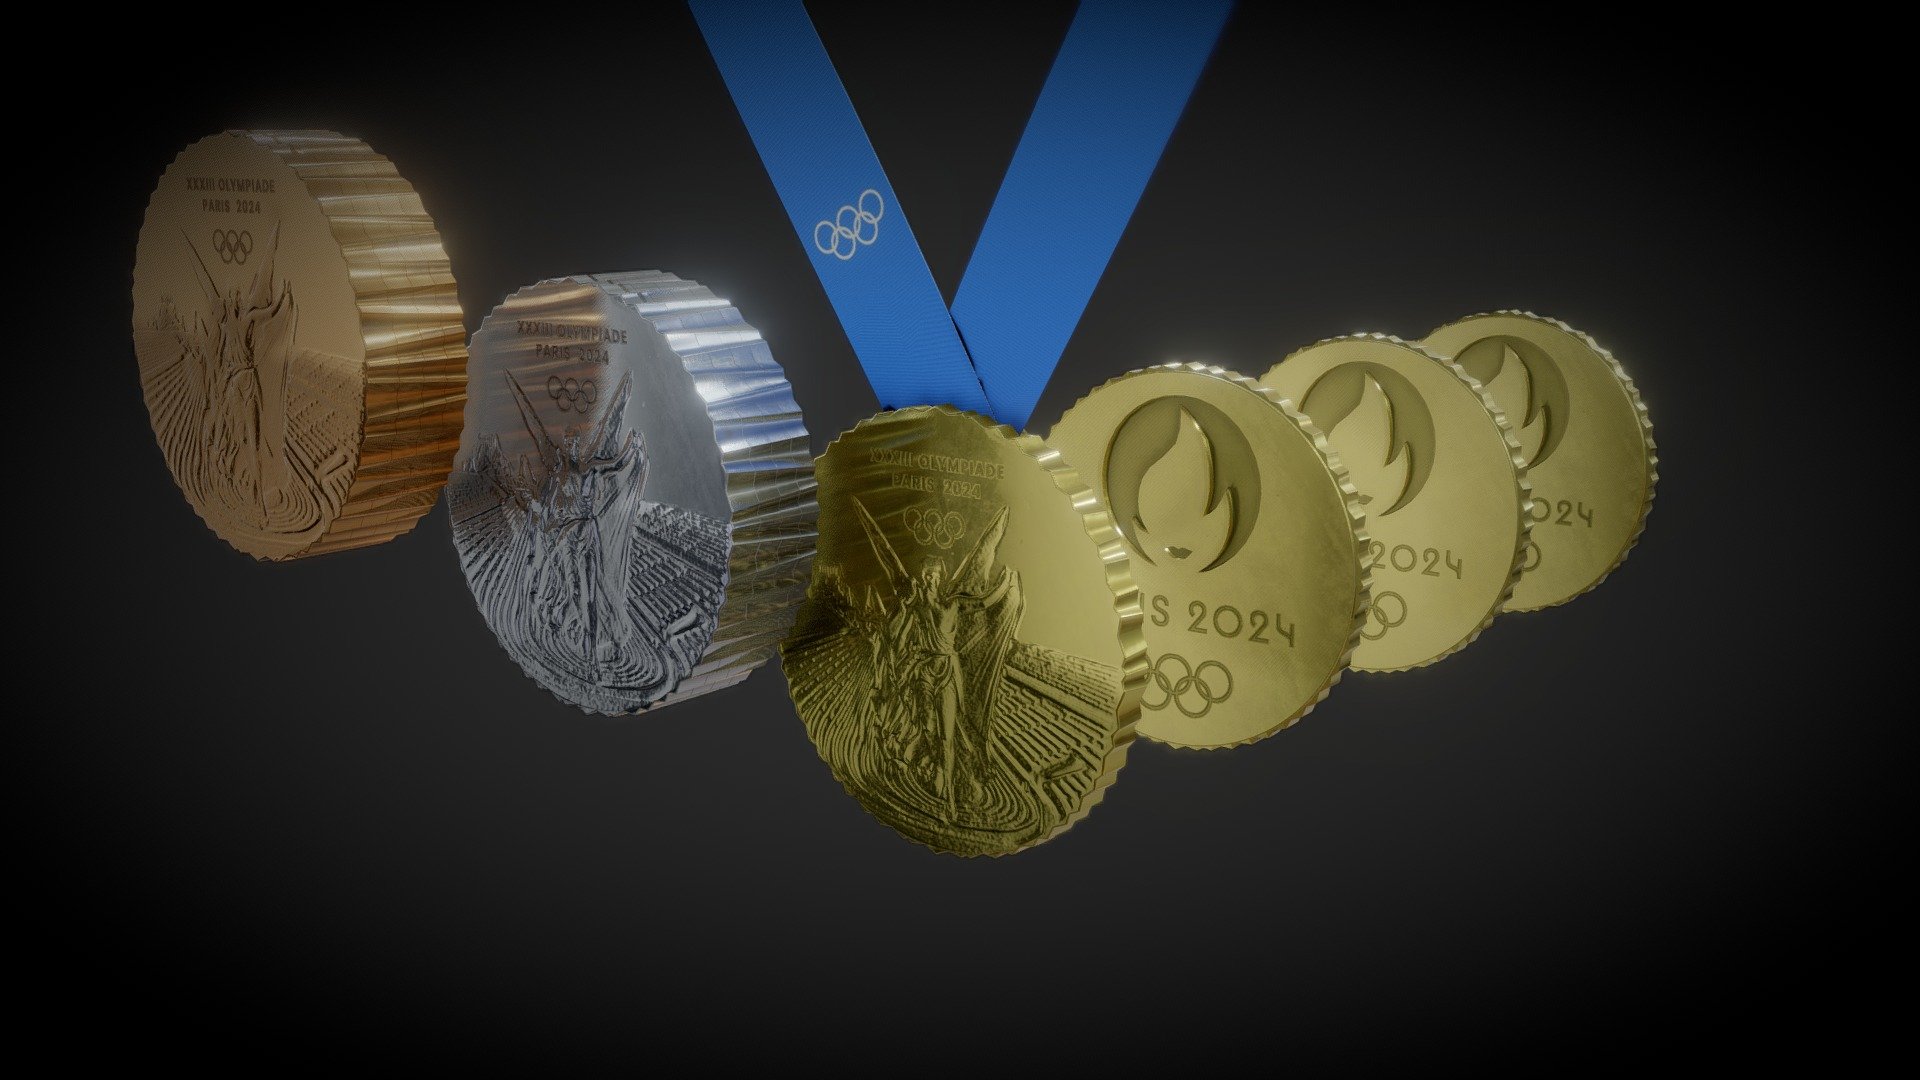 The Original Olympic Medals can be seen here - https://skfb.ly/oQM6T

Philippe Starck’s Paris 2024 Olympic medals that are designed to be shared These medals designed by Philippe Starck split into four, allowing winning Olympic athletes to share their success with their families.

Subdivision ready model High Quality 4K PBR textures For all 3 Gold, Silver, Bronze Medals
High poly Model and 3D Printing file are included in the Additional files

Perfect for any Purpose
Feel free to DM me for any question or custom requests :) - Philippe Starck’s Paris Olympics Medals Concept - Buy Royalty Free 3D model by Deftroy 3d model